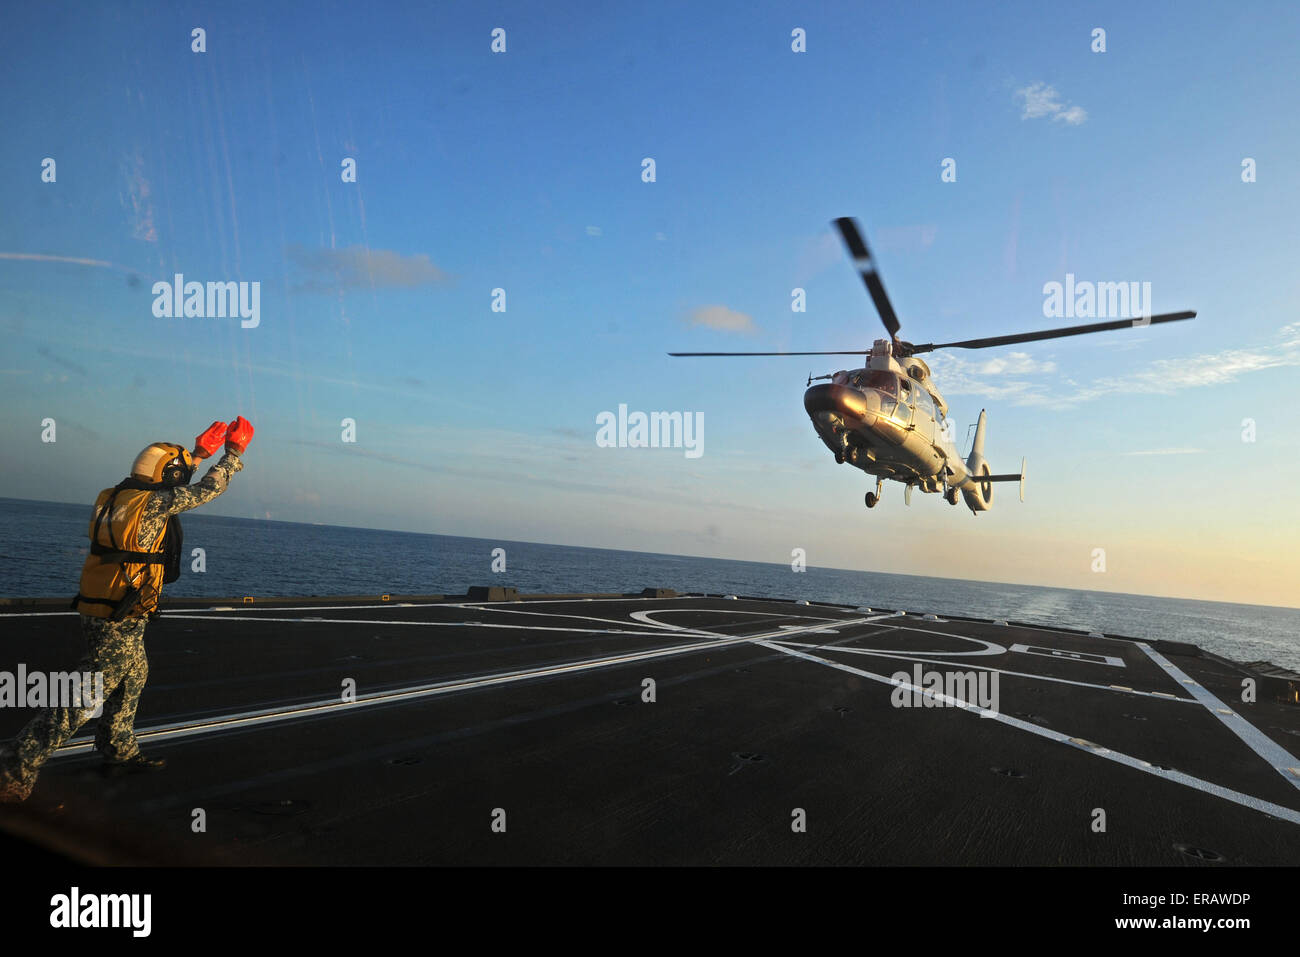 Beijing, China. 25th May, 2015. A Dolphin Z-9 helicopter of China's Navy missile frigate CNS Yulin flies off the deck of Singapore's Navy missile frigate RSS Intrepid during the "Exercise Maritime Cooperation 2015", May 25, 2015. The Singapore and Chinese navies concluded the inaugural Exercise Maritime Cooperation 2015 on May 25. © Then Chih Wey/Xinhua/Alamy Live News Stock Photo